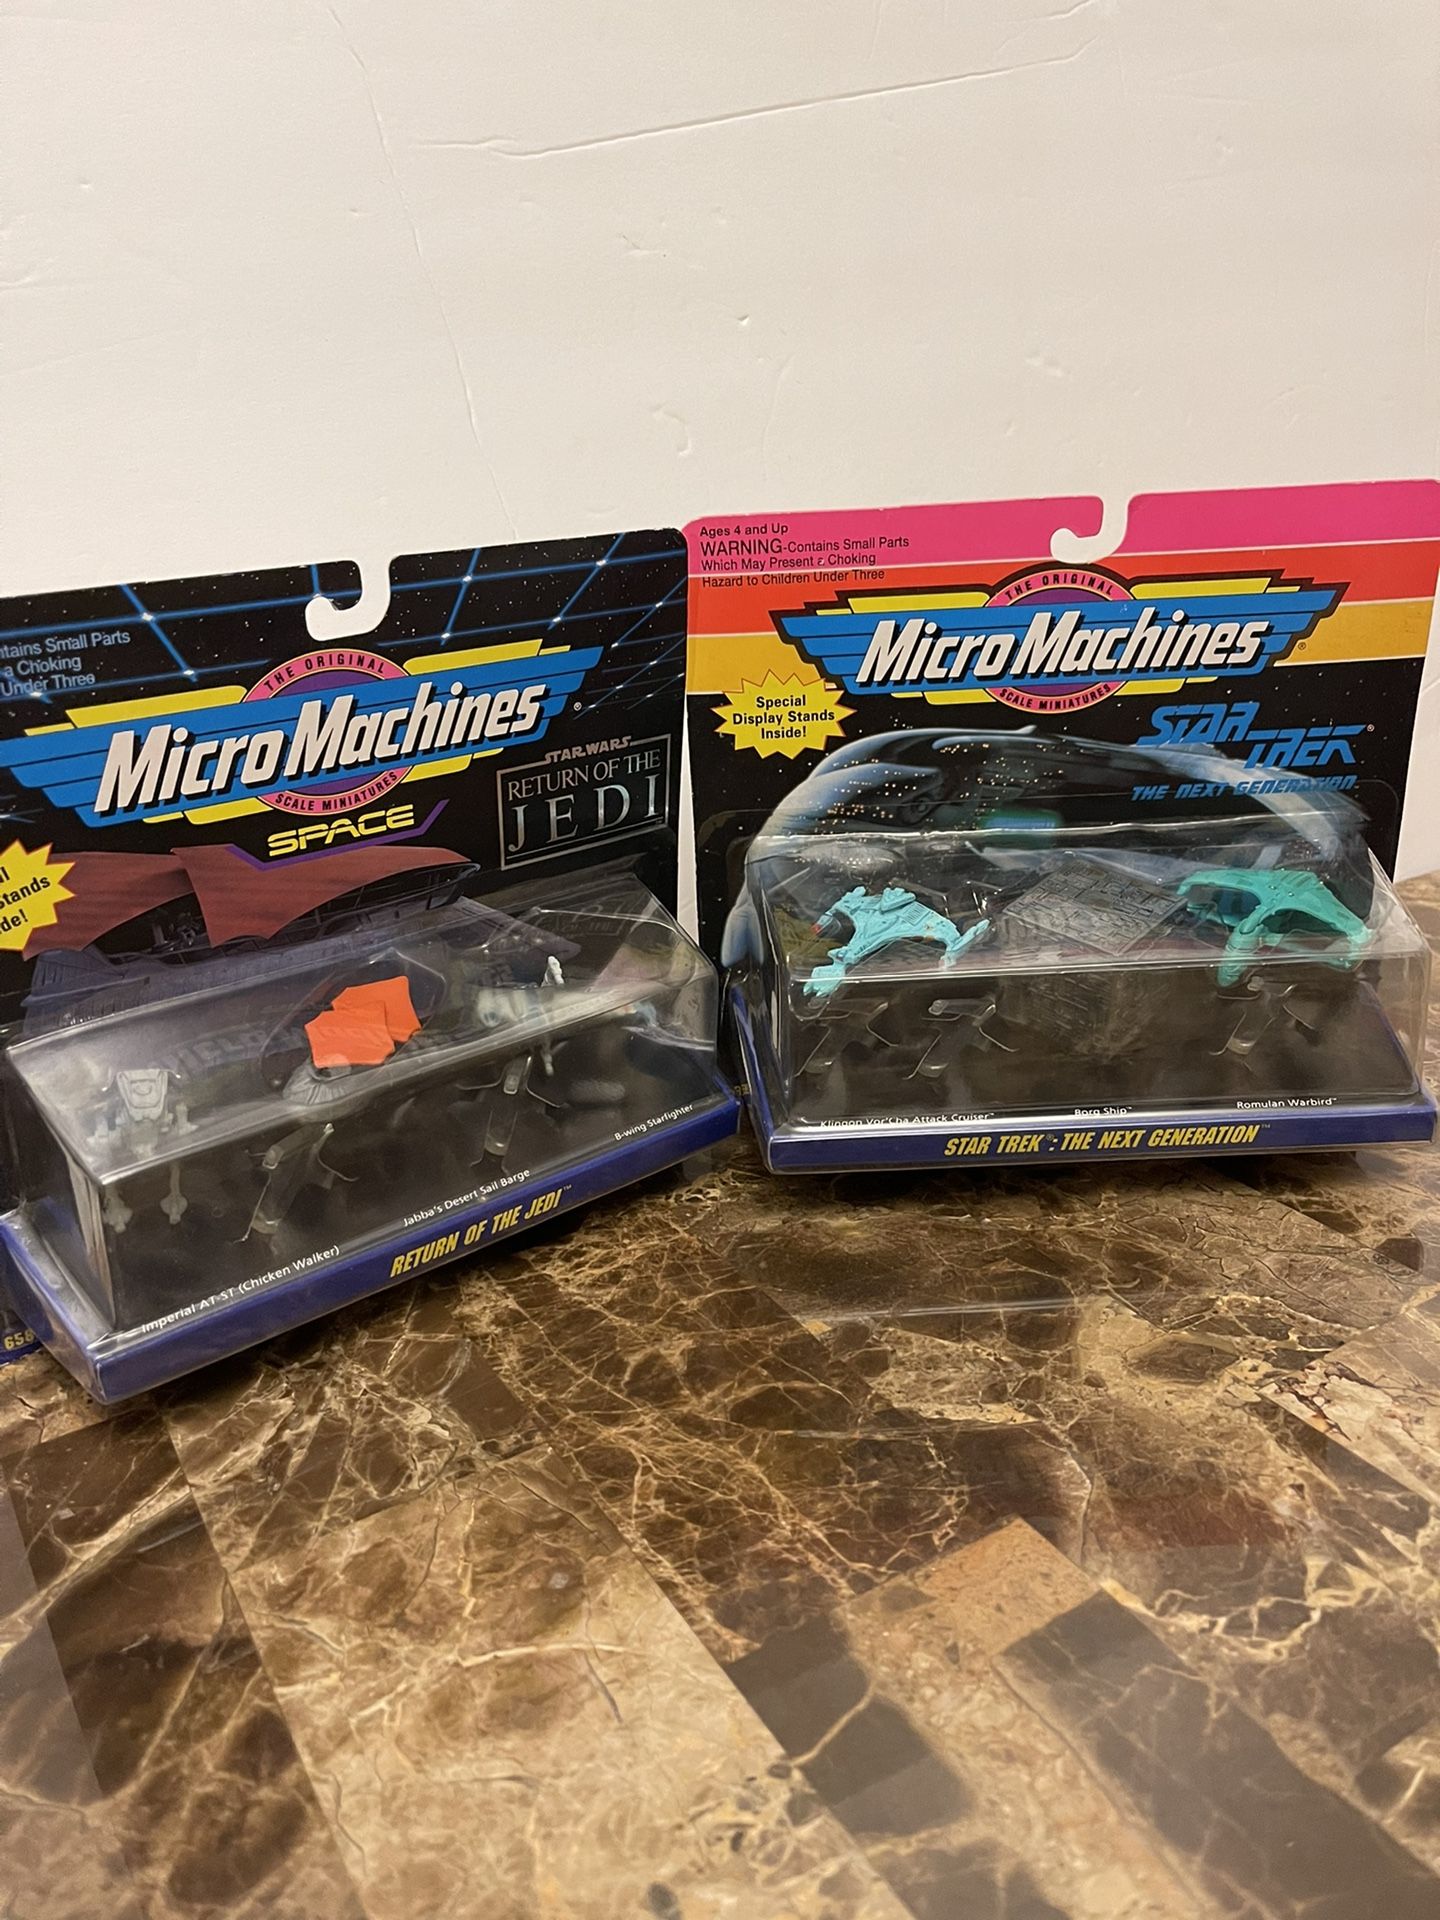 Vintage 1993 Galoob Star Trek TNG Micro Machines Micro Machines STAR WARS Return of the Jedi Collection #3 MOC Galoob 1993 Collection #3 